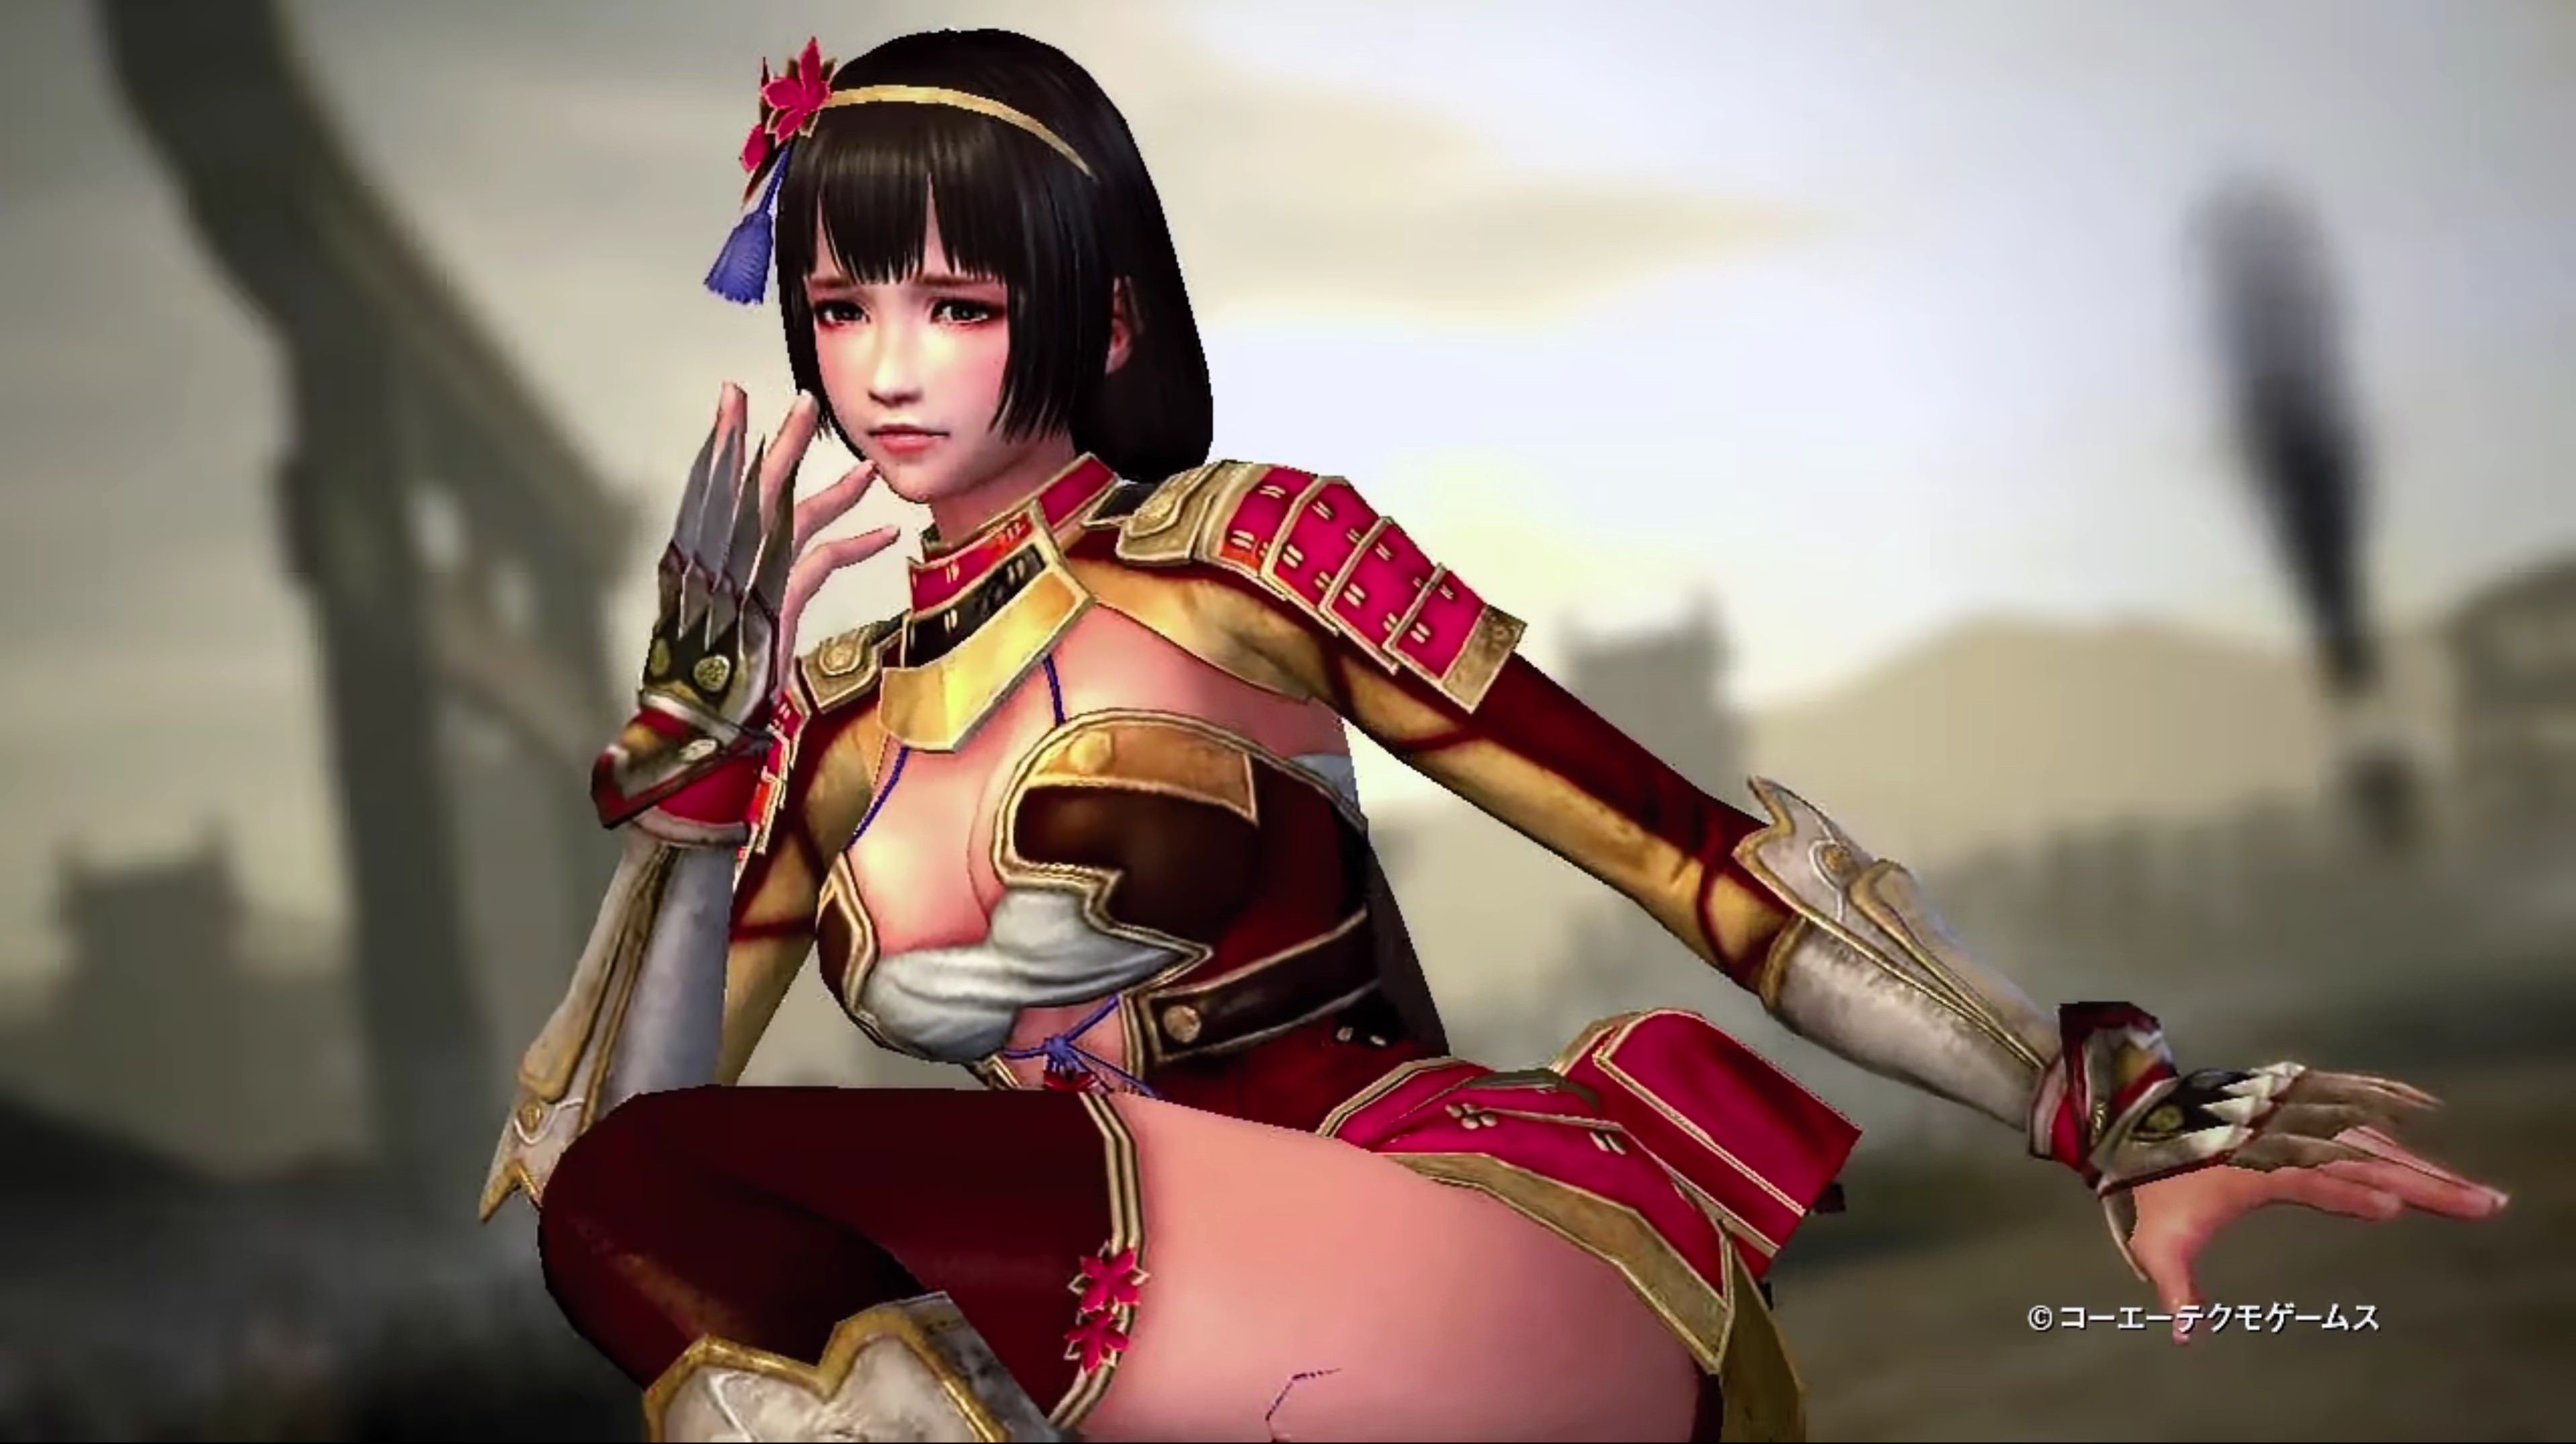 America: "Japan stop making sexually exploitative game characters!!"This is a real woman!!! 32